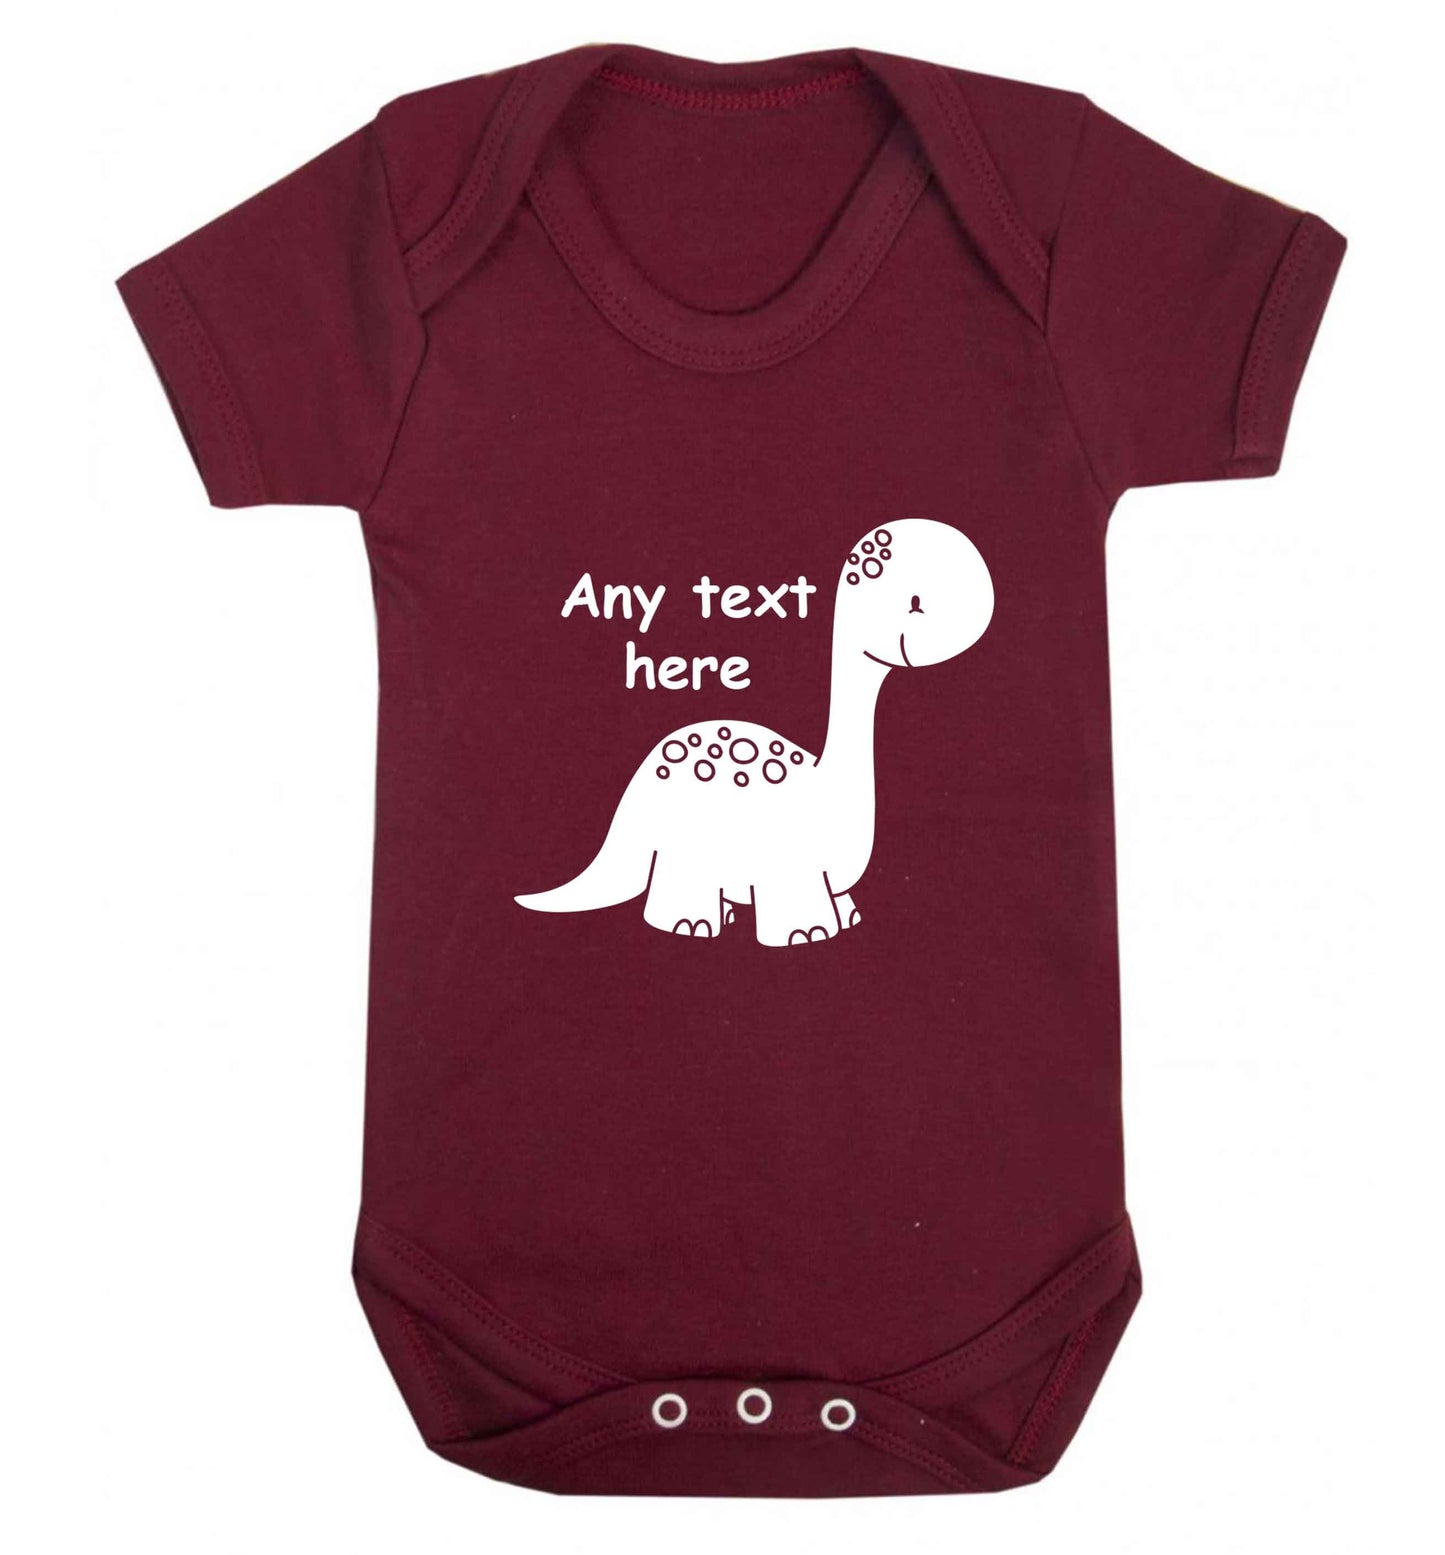 Dinosaur any text baby vest maroon 18-24 months